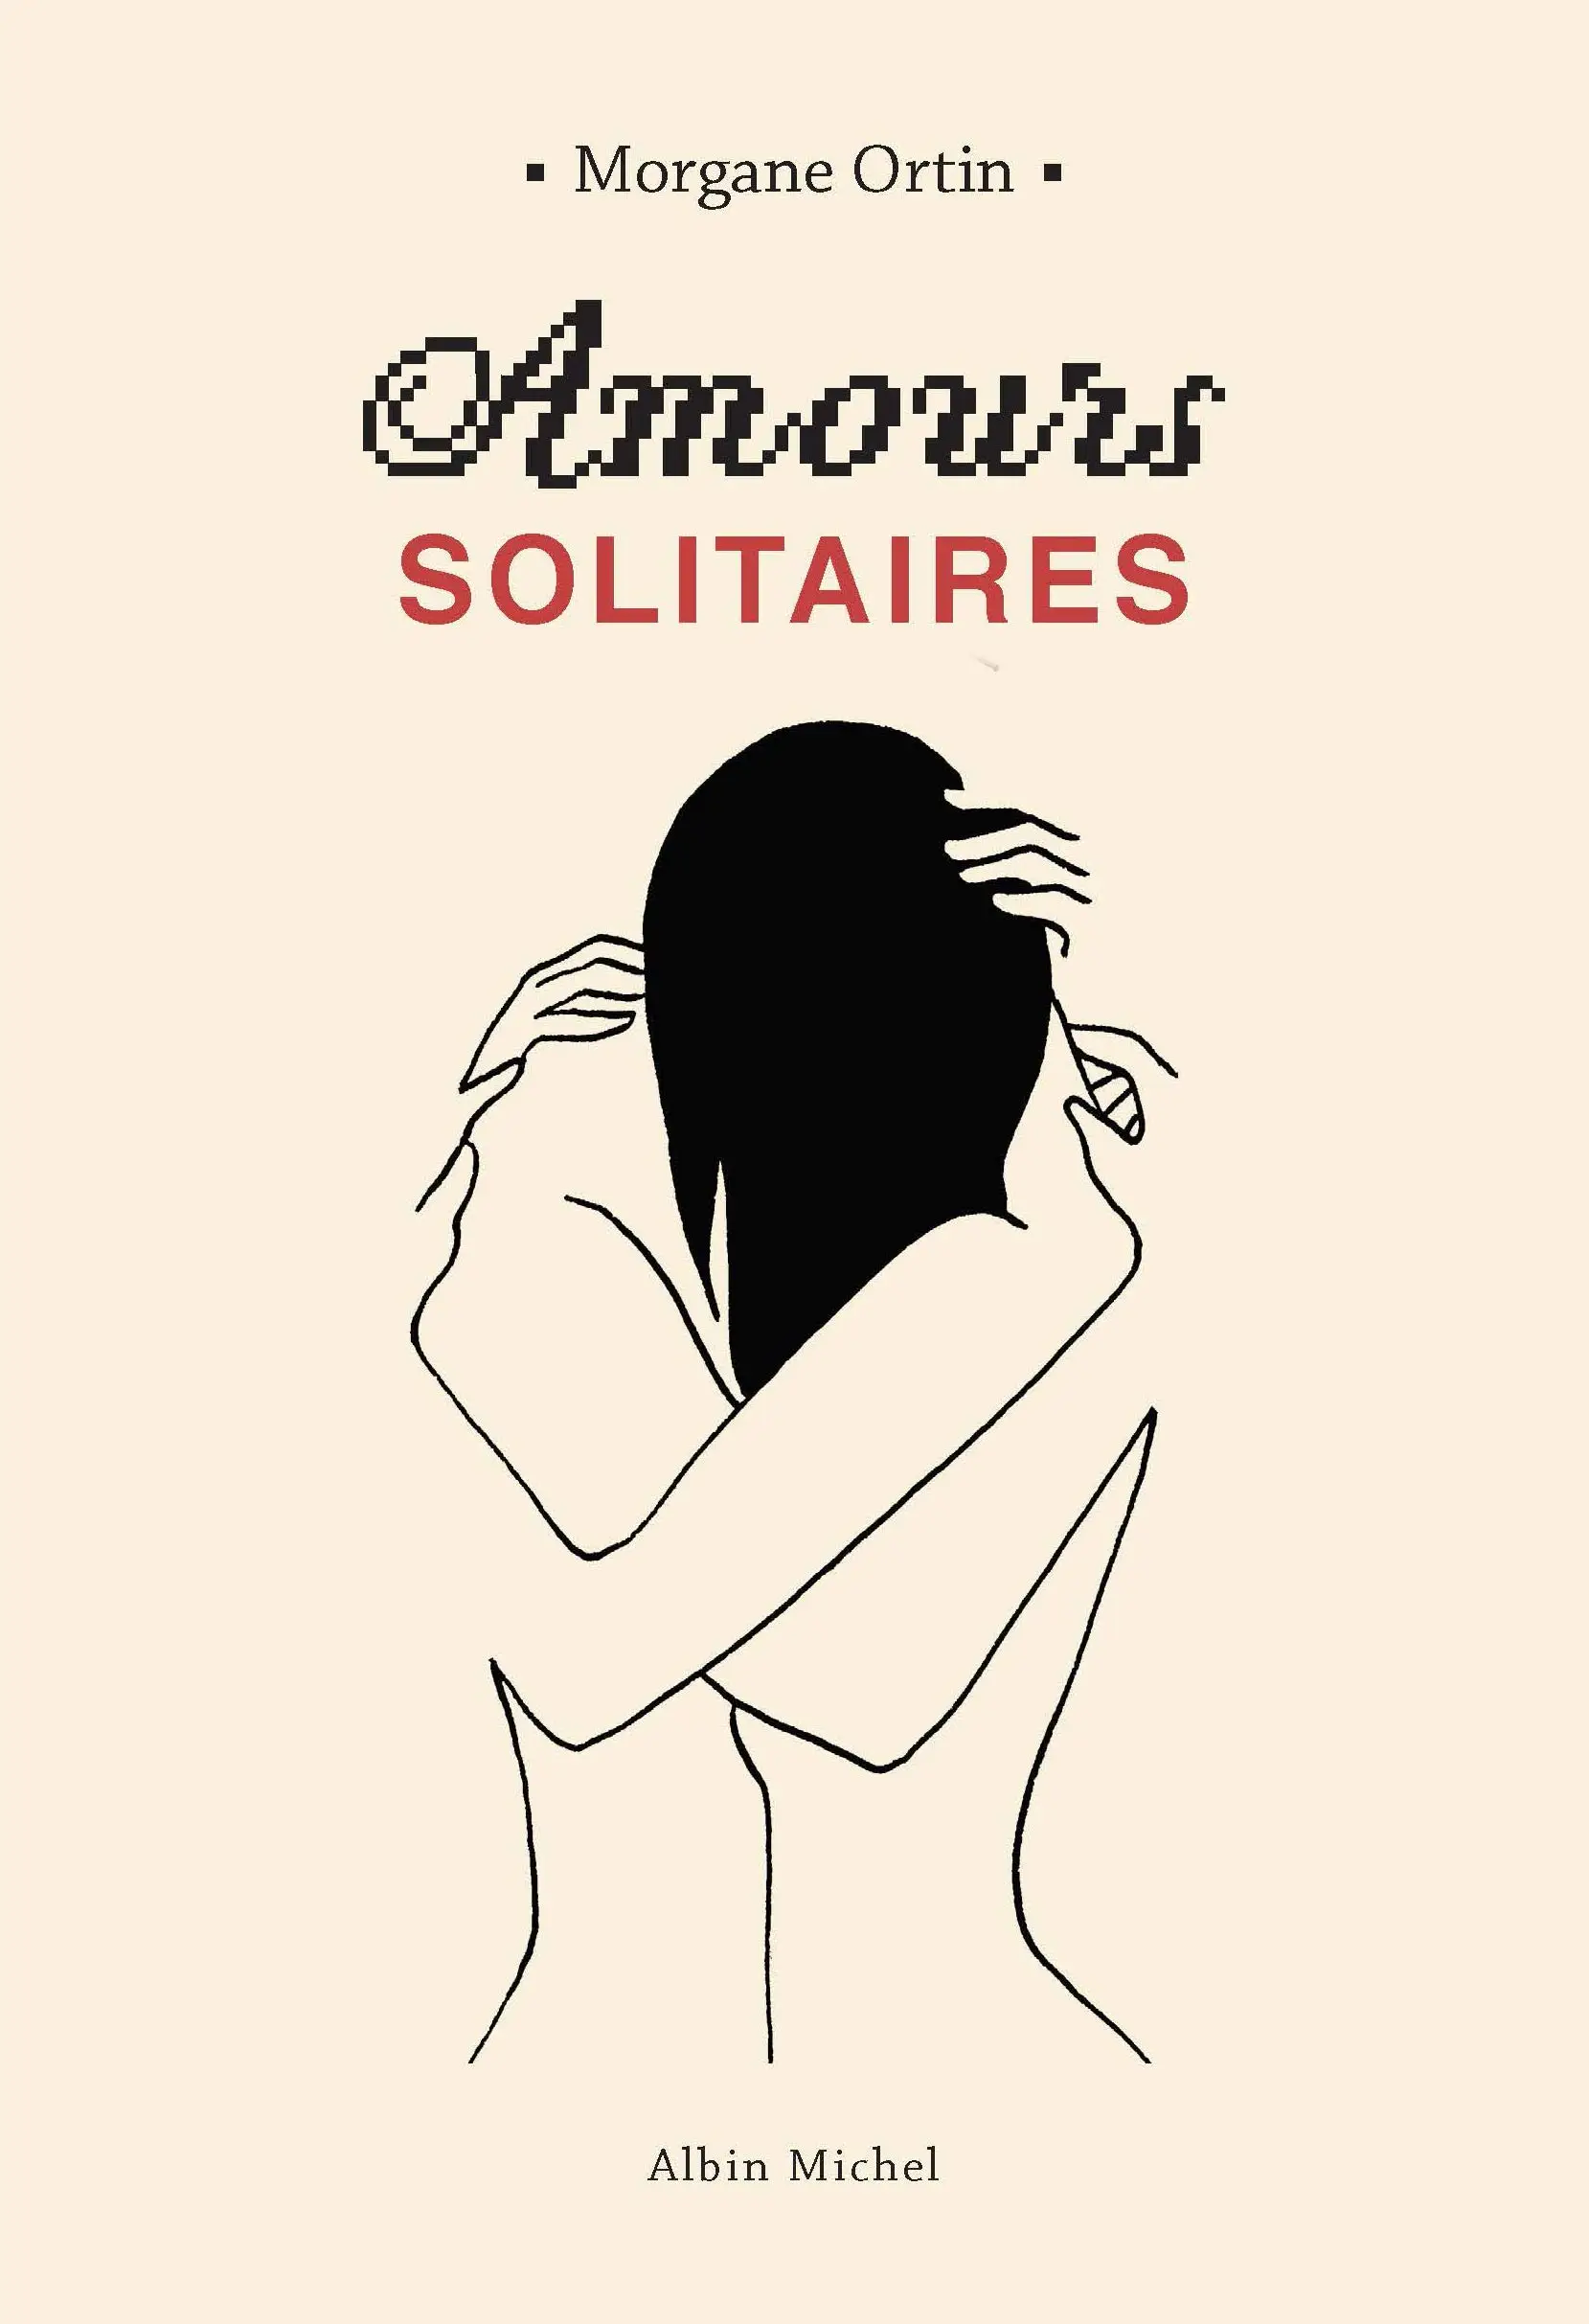 Livre pas cher - Amours solitaires - Morgane Ortin